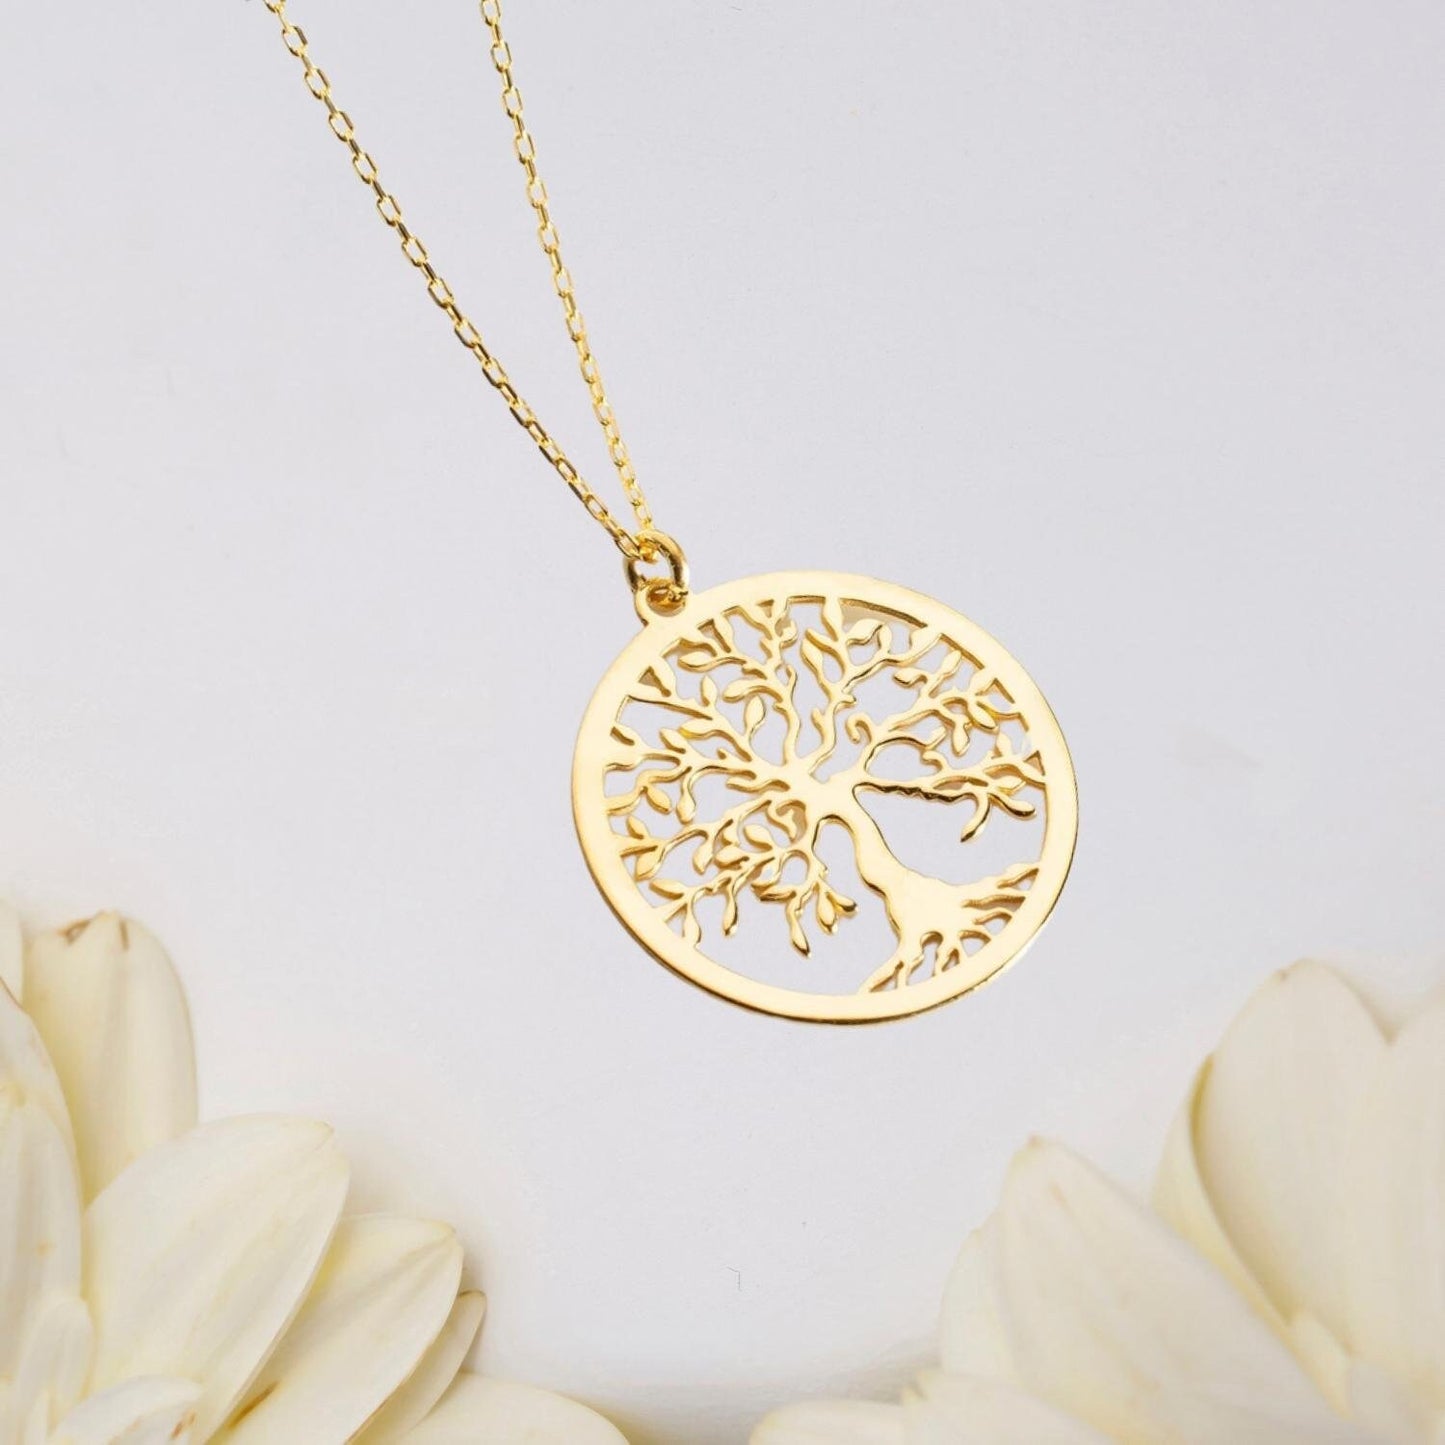 Sterling Silver Tree Of Life Necklace, Family Name Pendant, Grandma Birthday Gift, Family Tree Minimalist Dainty Necklace, Arbre de Vie Gift